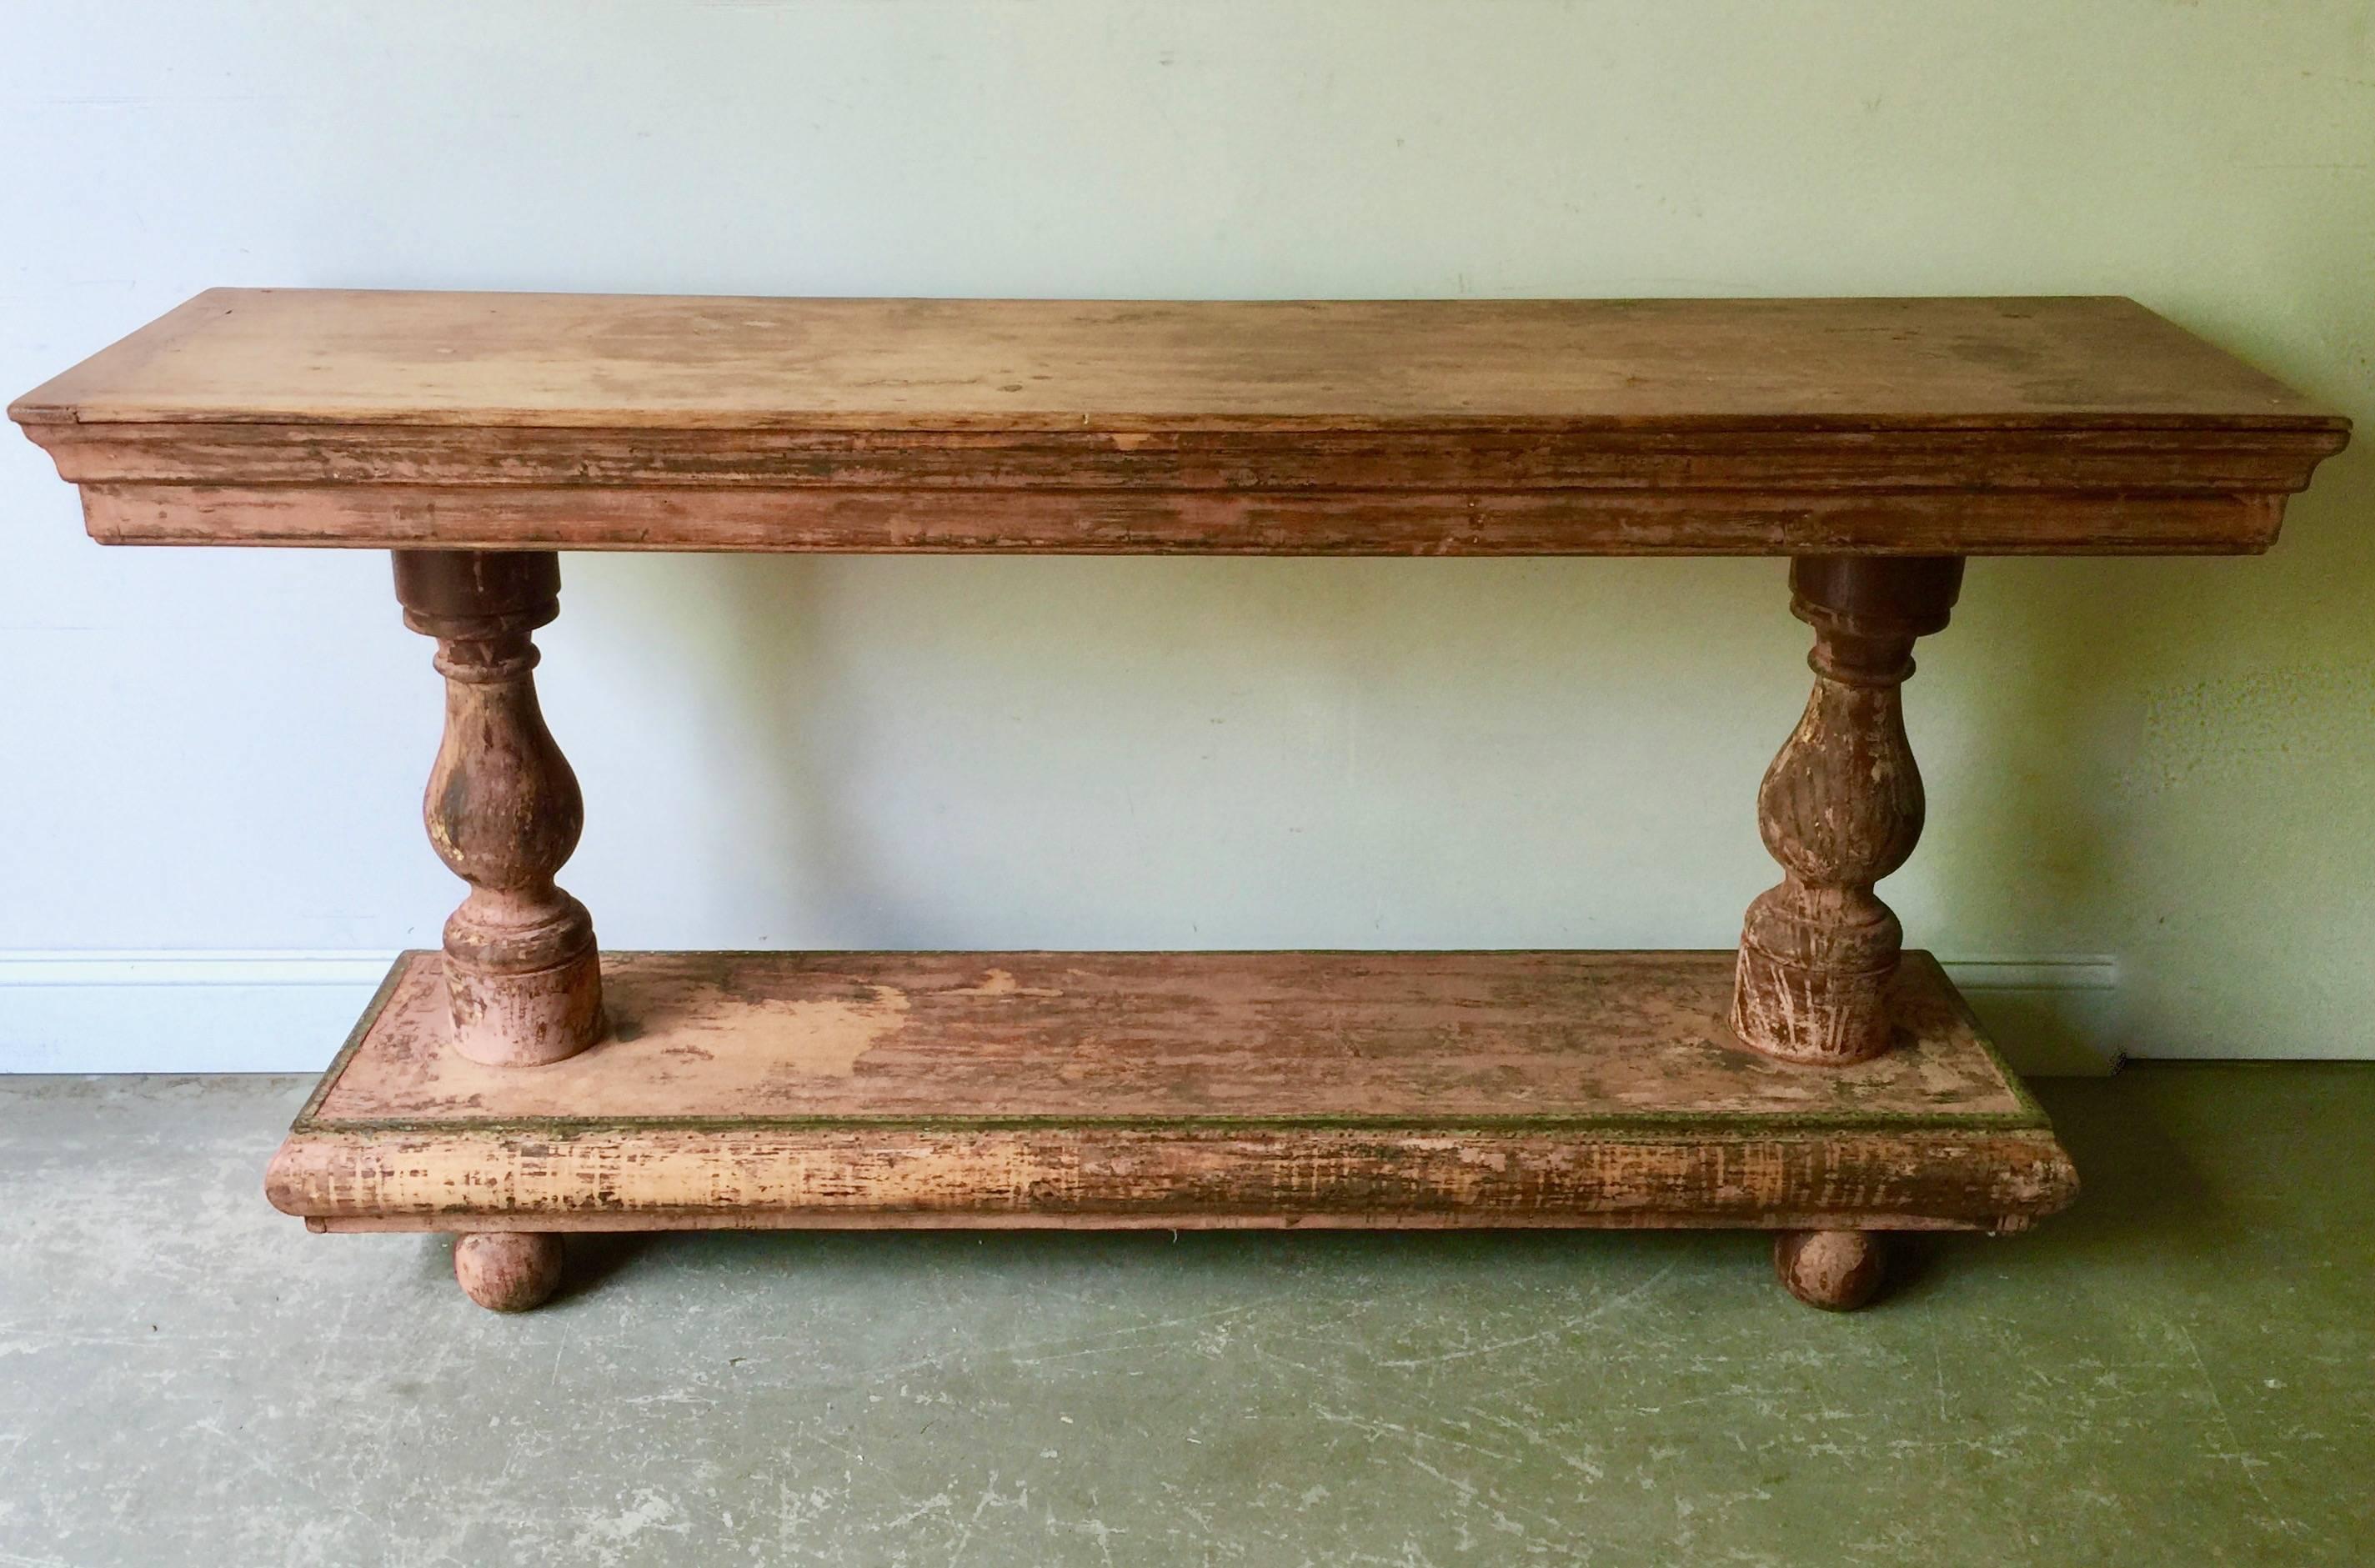 A handsome French 19th century console/cloth display with turned bases supported by carved legs. Wonderful patinated surface offering a generous display place for any decor with one drawer and time worn brass edge of the base.
Here are few examples